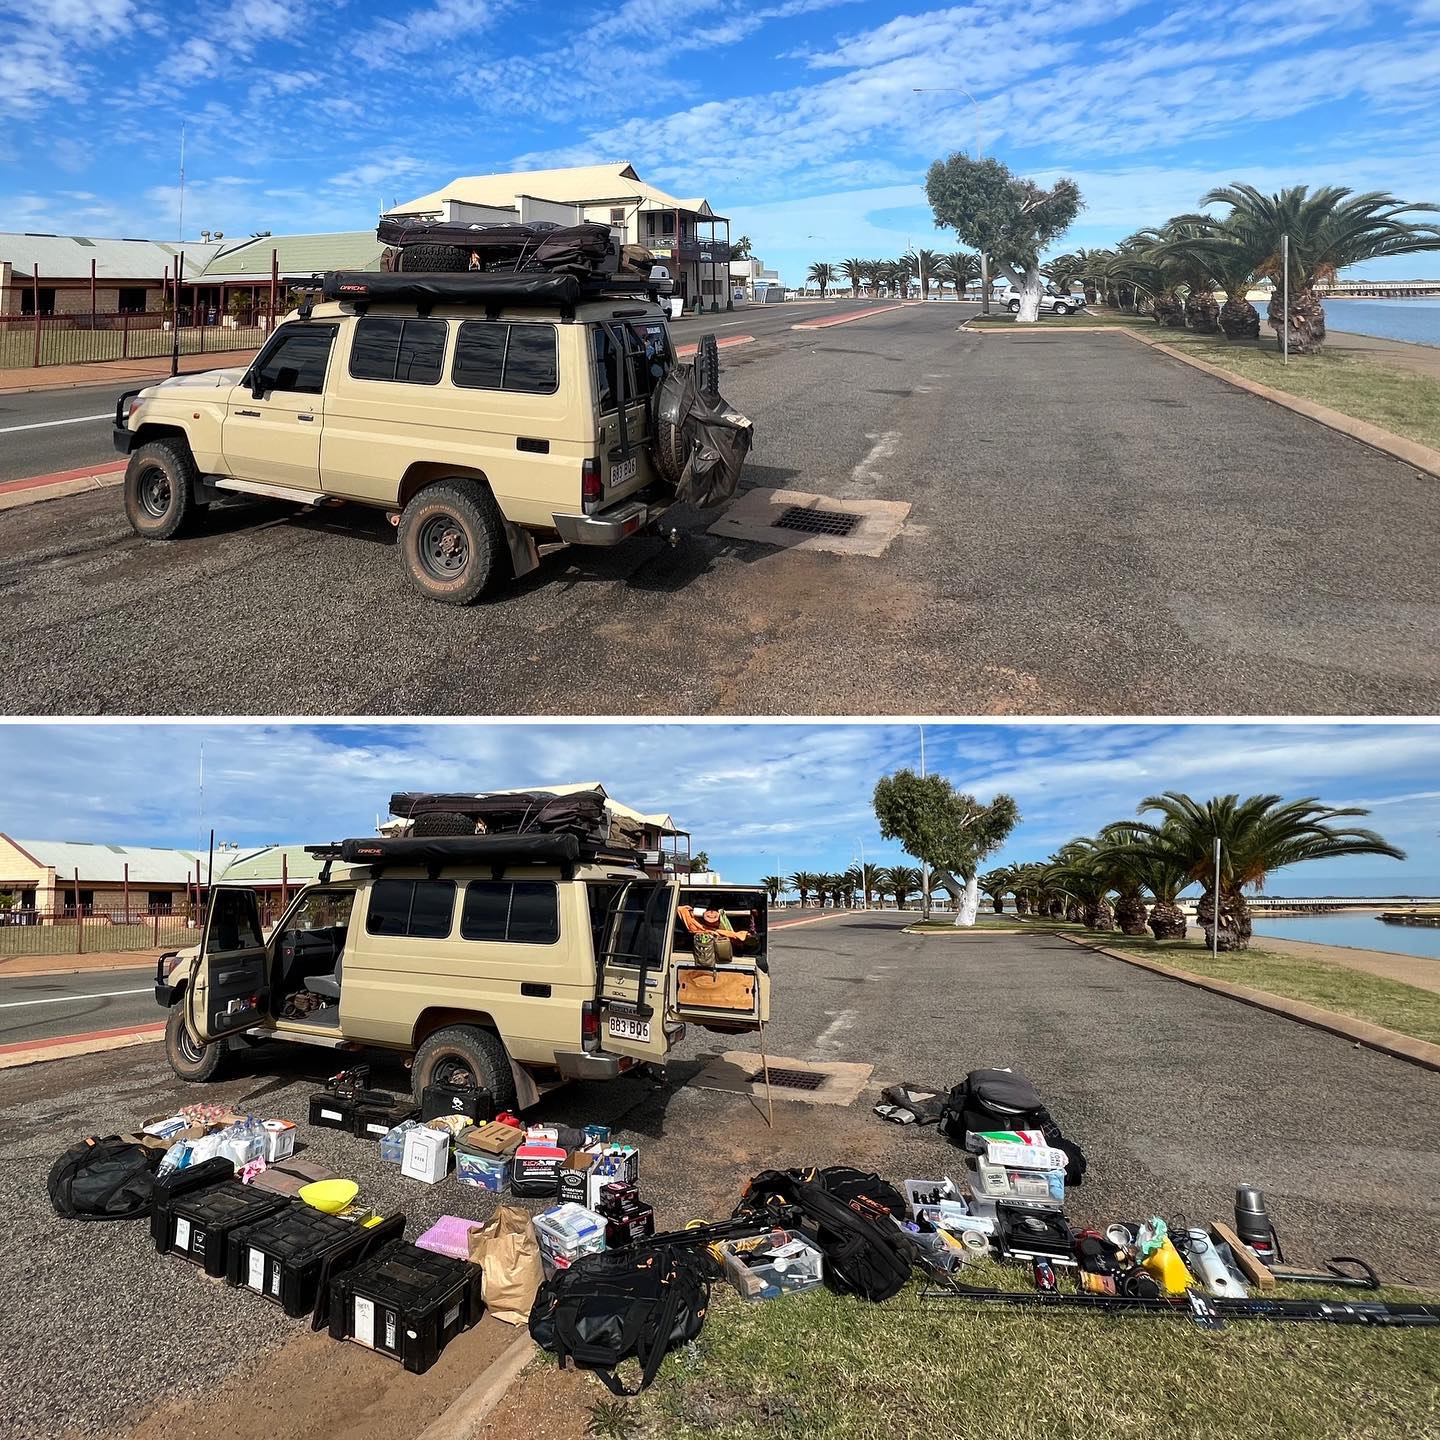 Worst part of every trip!
Got into Broome a few days ago, drove down to Exmouth, now Carnarvon. Time to repack for @dirkhartogisland.
Living the Dream…soon!